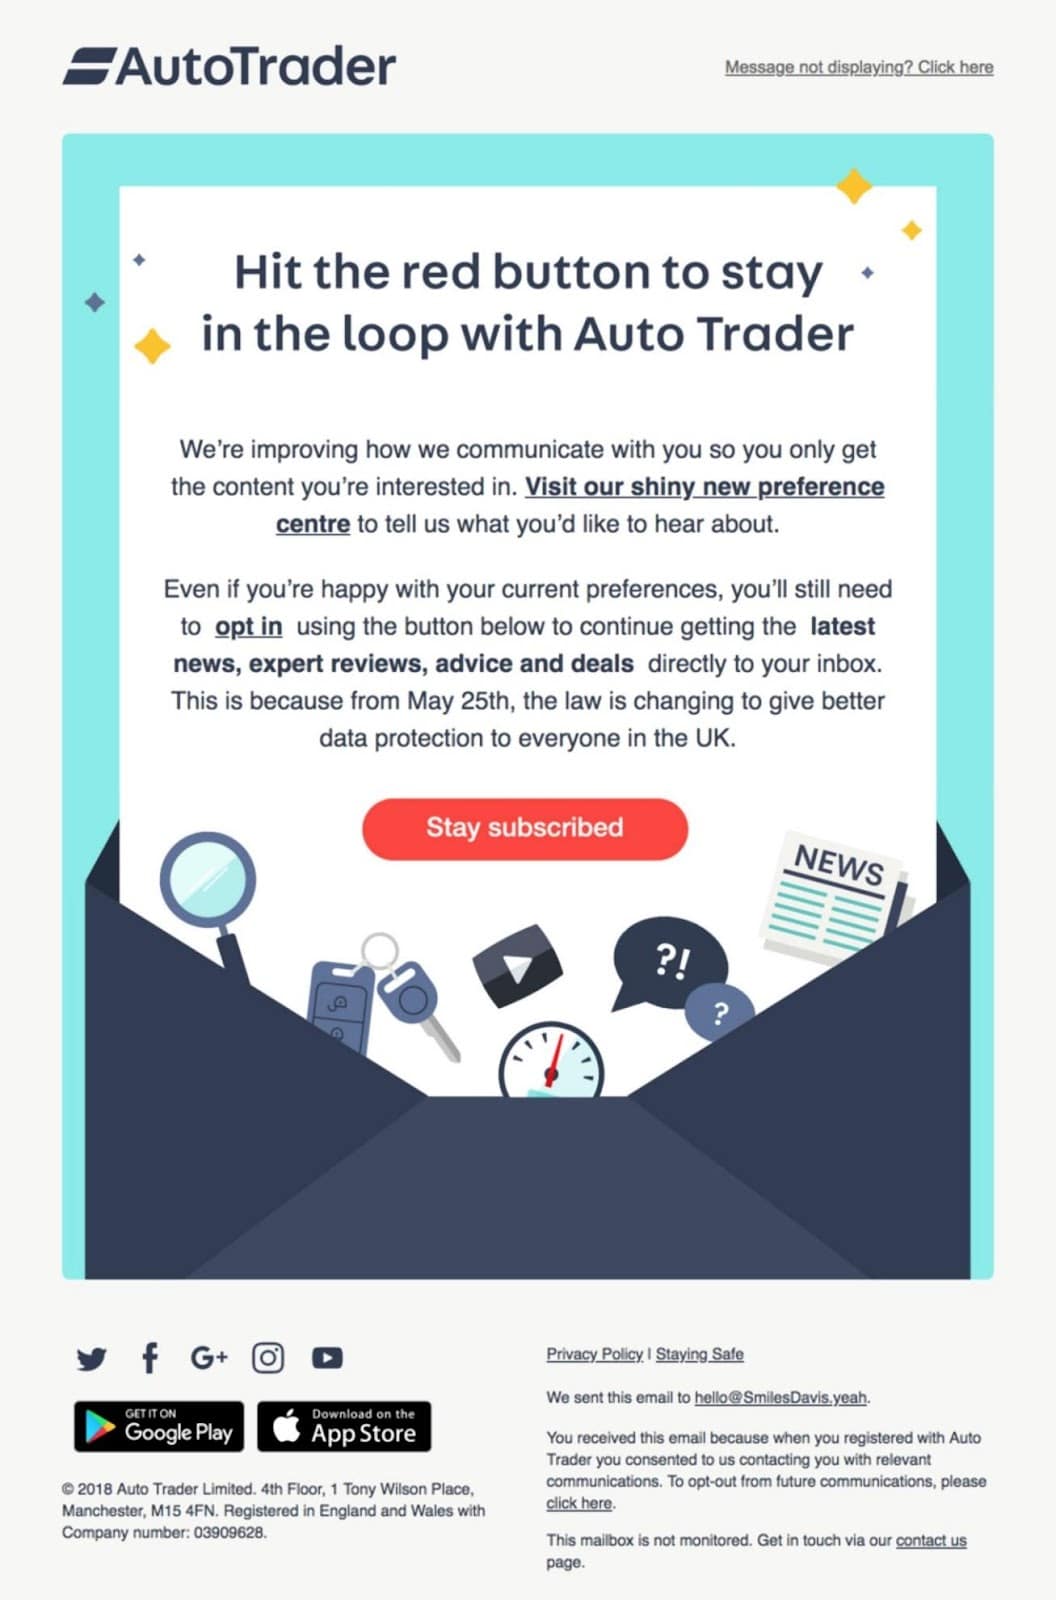 AutoTrader email example asking users if they would like to unsubscribe